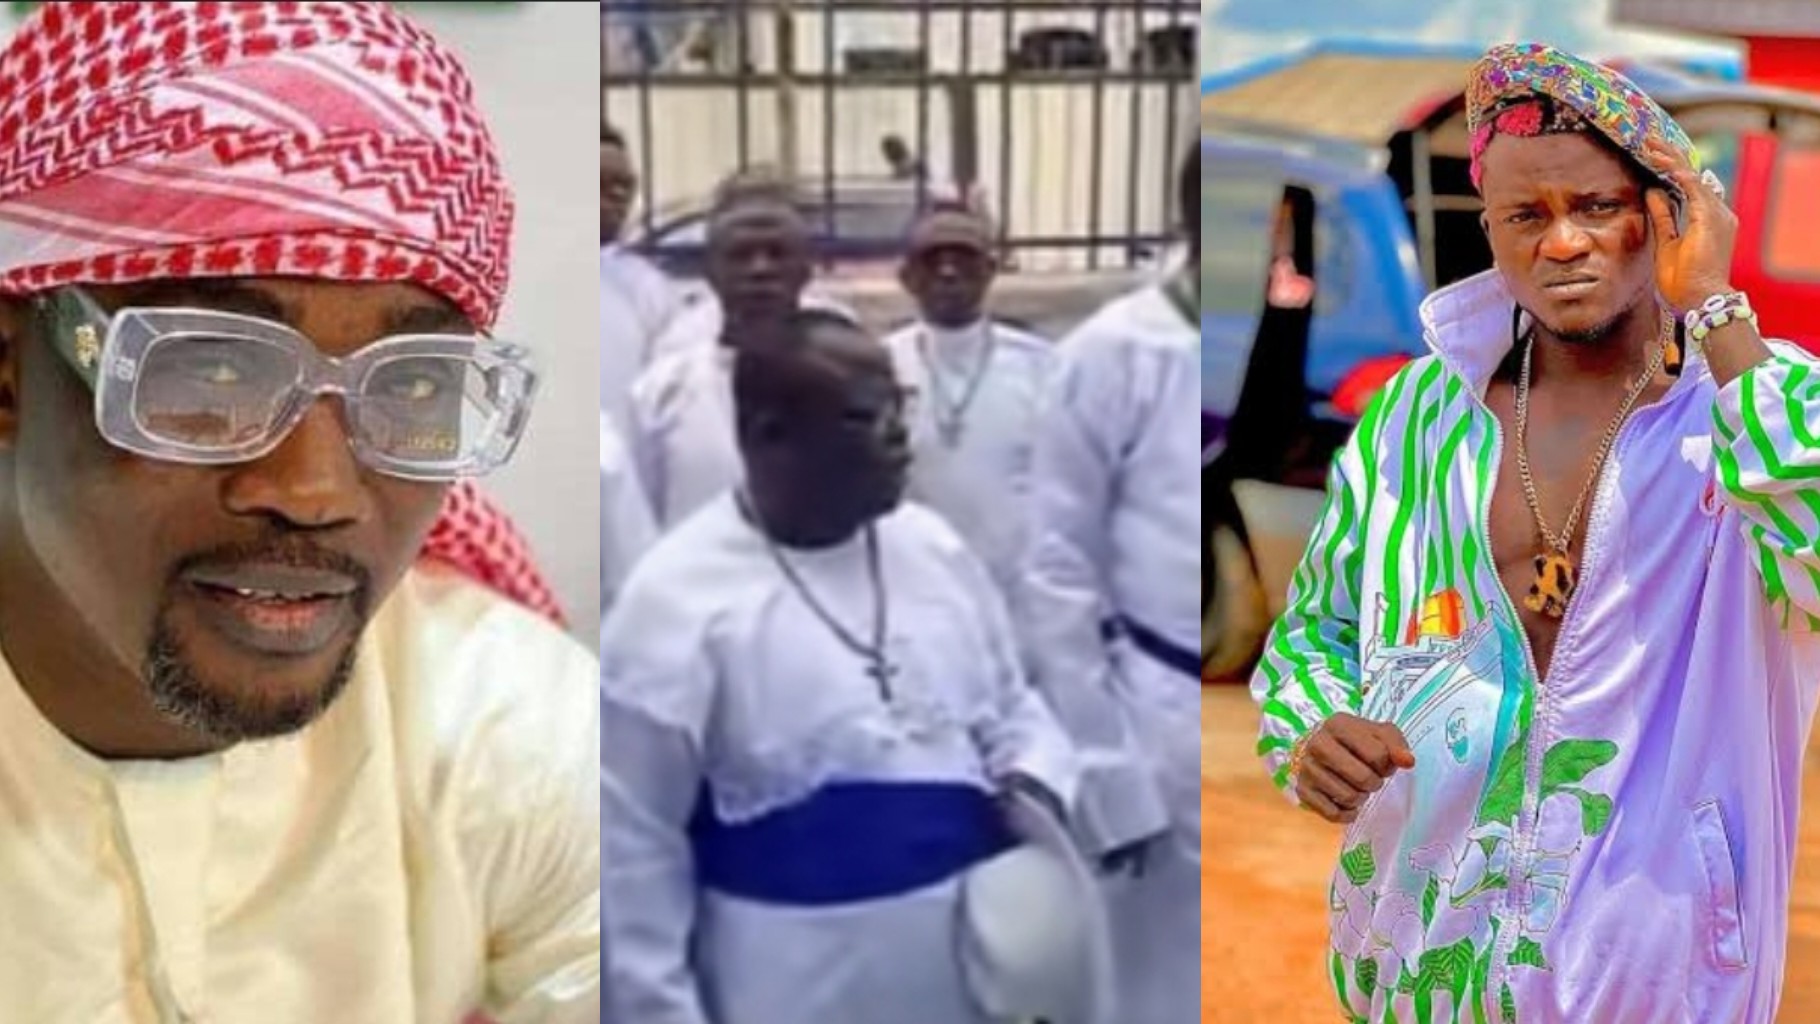 Celestial Church ‘task force’ visit Parish scheduled for singers Pasuma and Portable performance, fans react (Video)